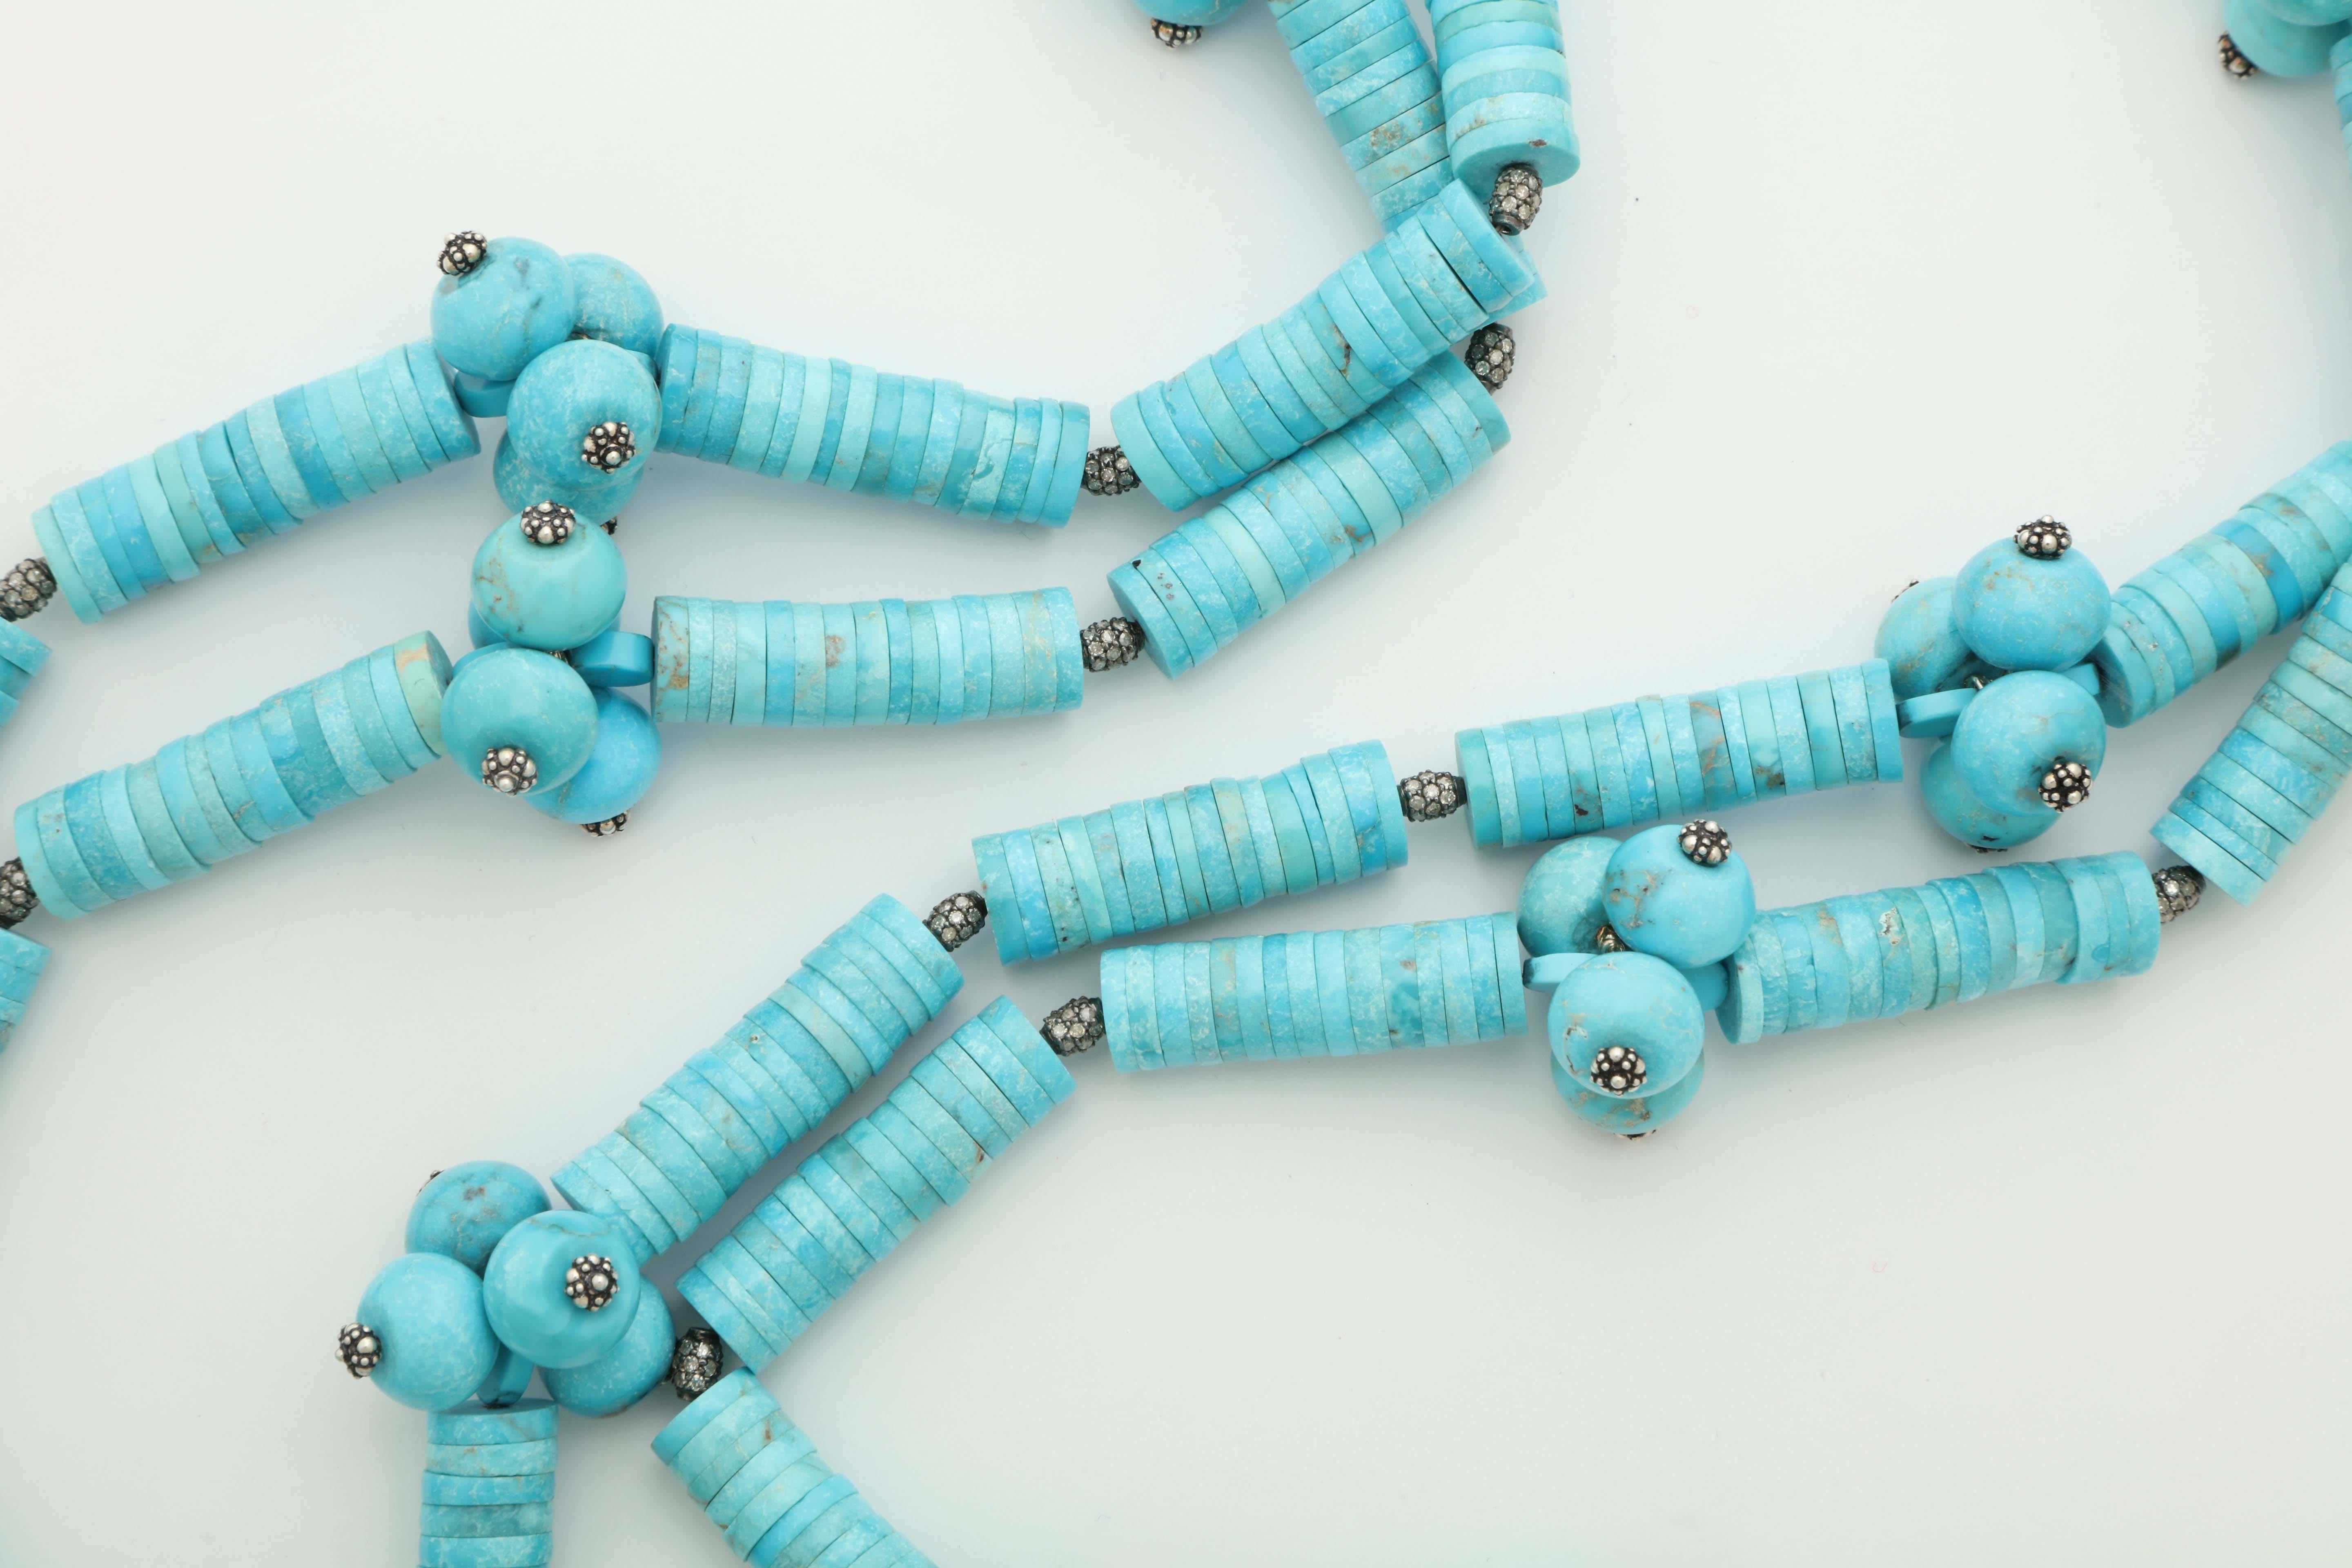 A necklace composed of turquoise discs, turquoise beads, rhodium plated sterling silver and pave diamond beads and rhodium plated sterling silver headpins. 
Length: 58 inches